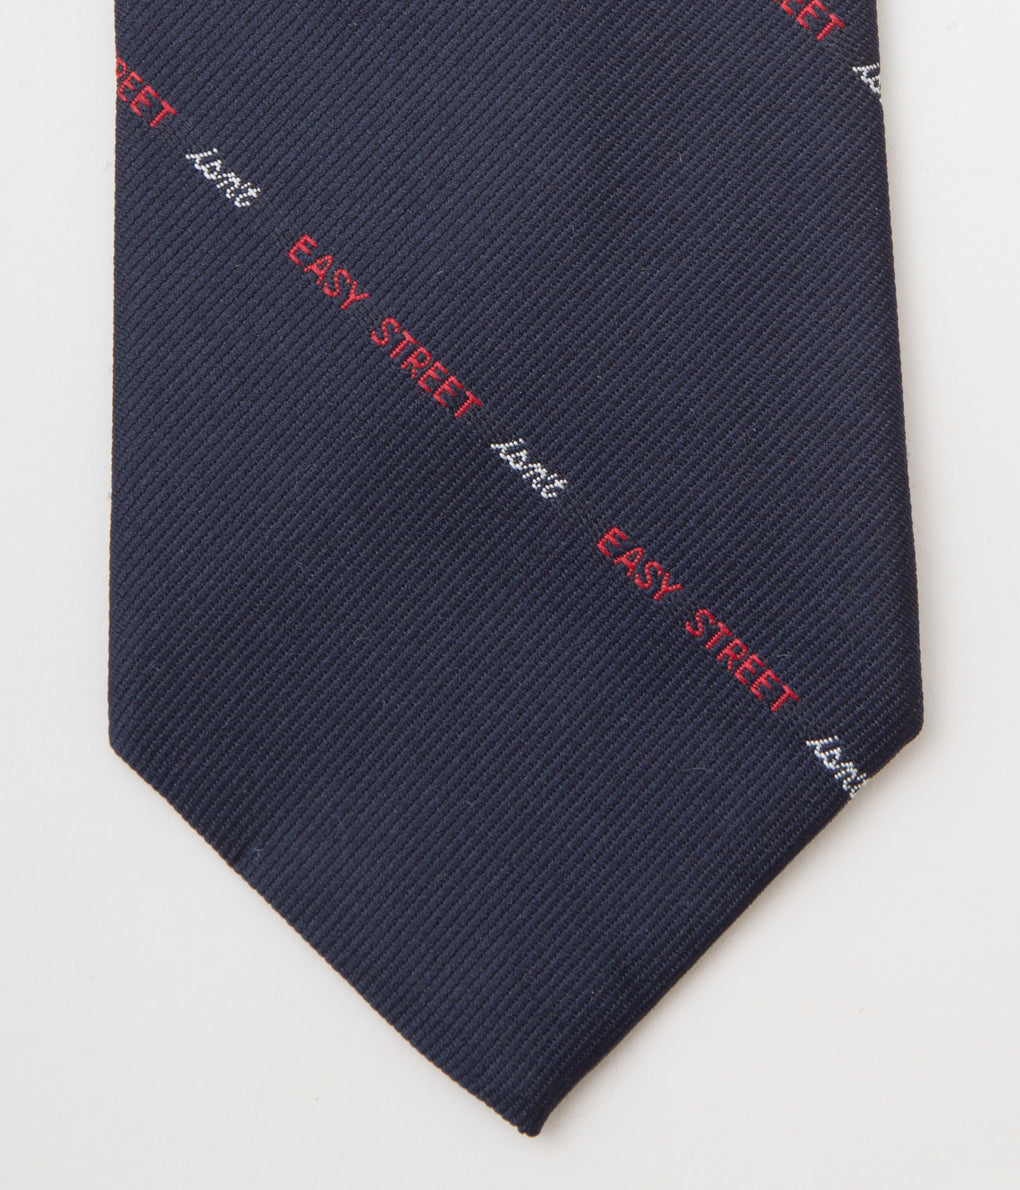 FROM USA "O'CONELL LUCAS-CHELF EMBROIDERED TIE EASY STREET"(NAVY)